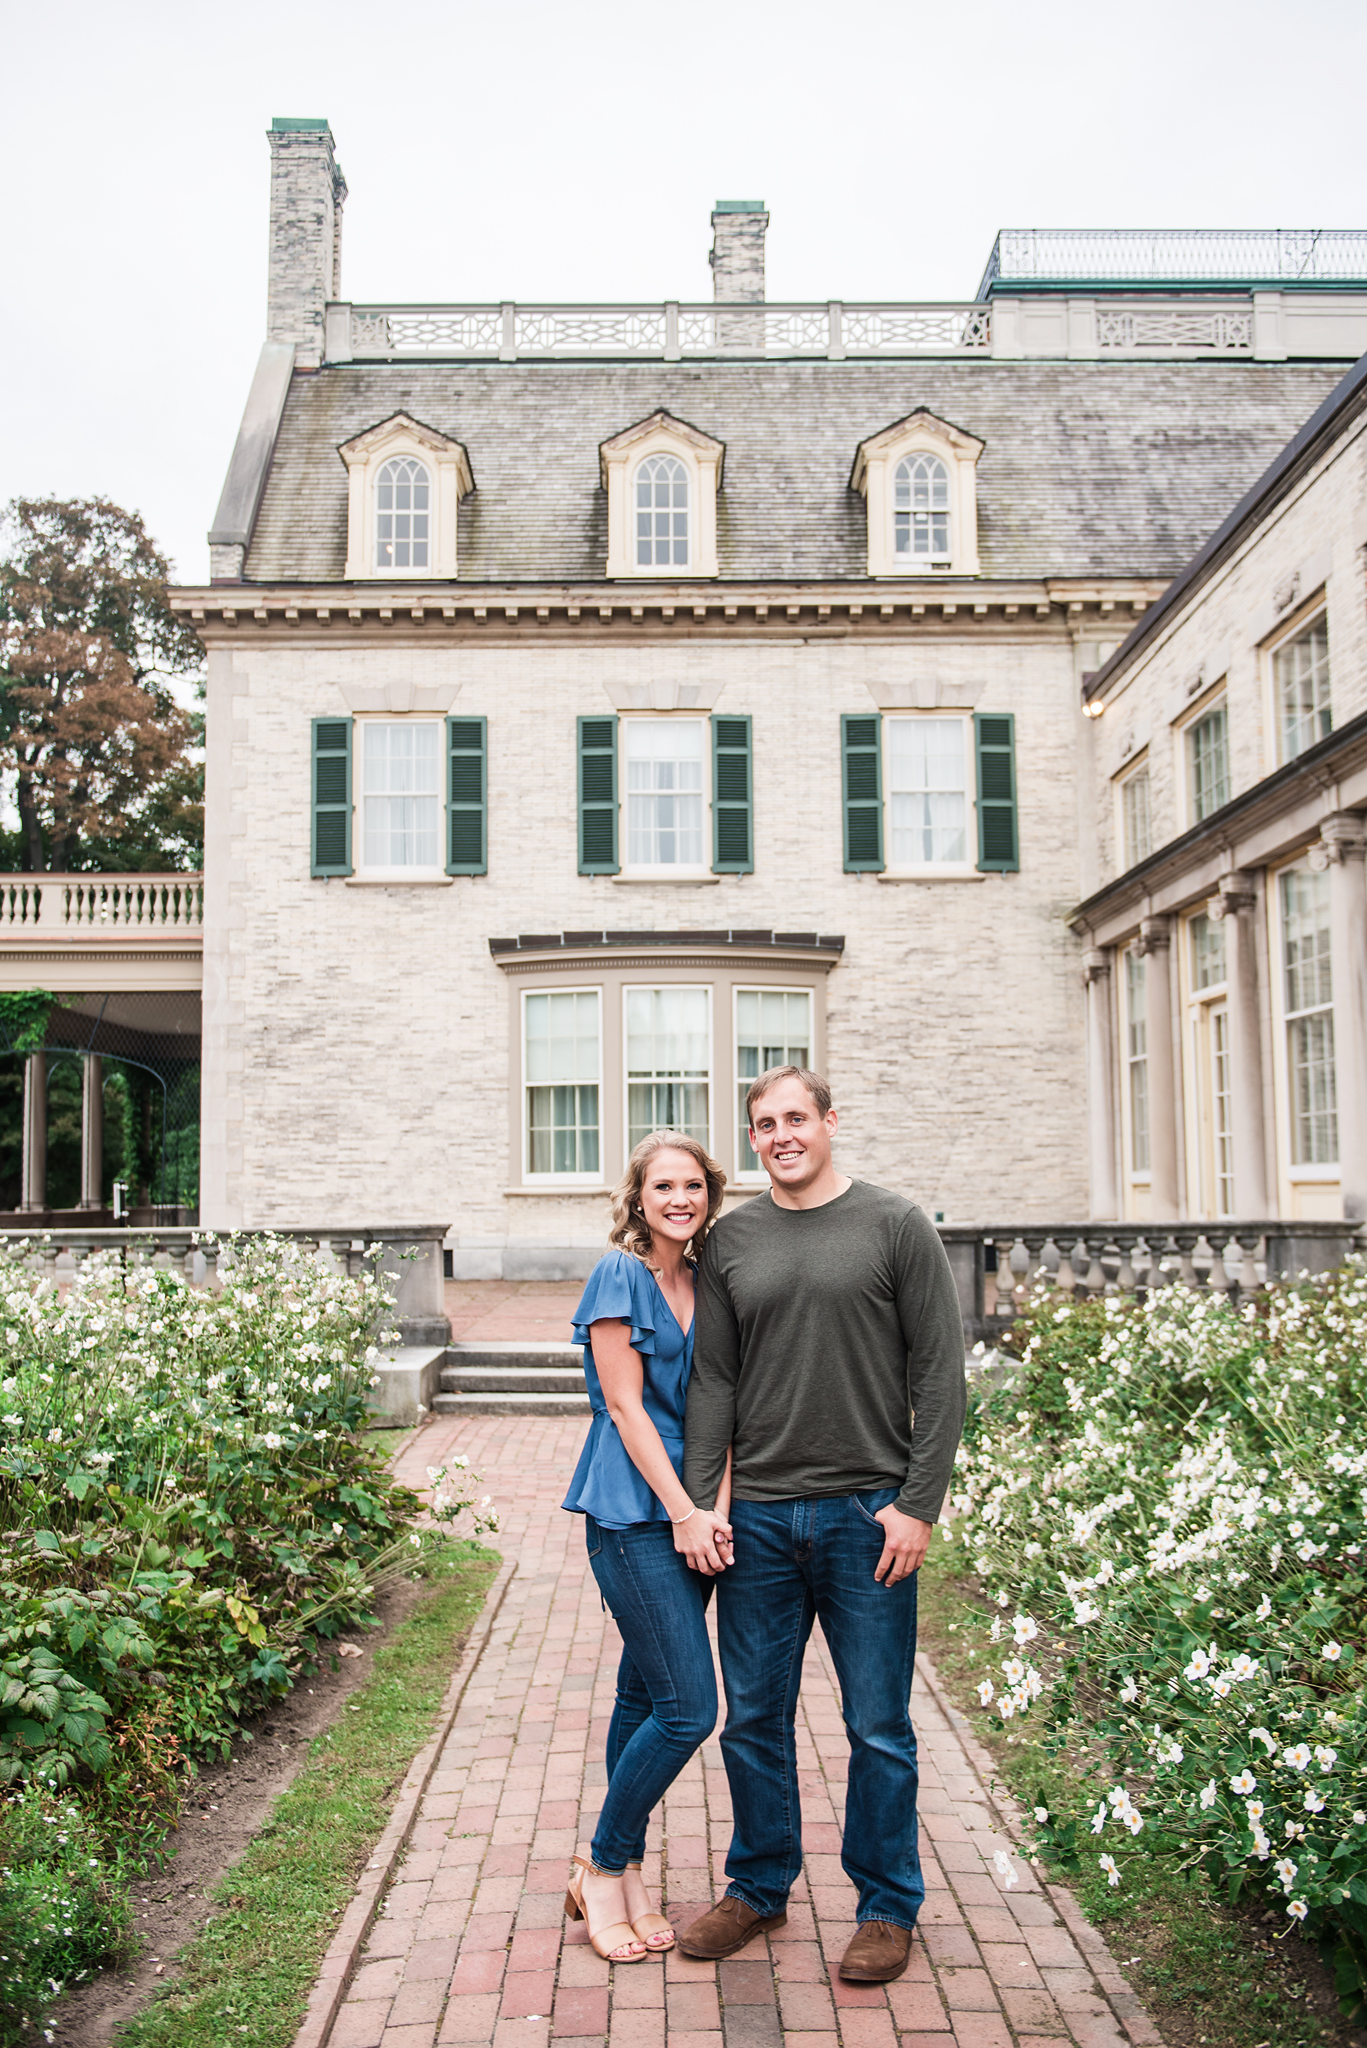 George_Eastman_House_Rochester_Yacht_Club_Rochester_Engagement_Session_JILL_STUDIO_Rochester_NY_Photographer_DSC_8063.jpg